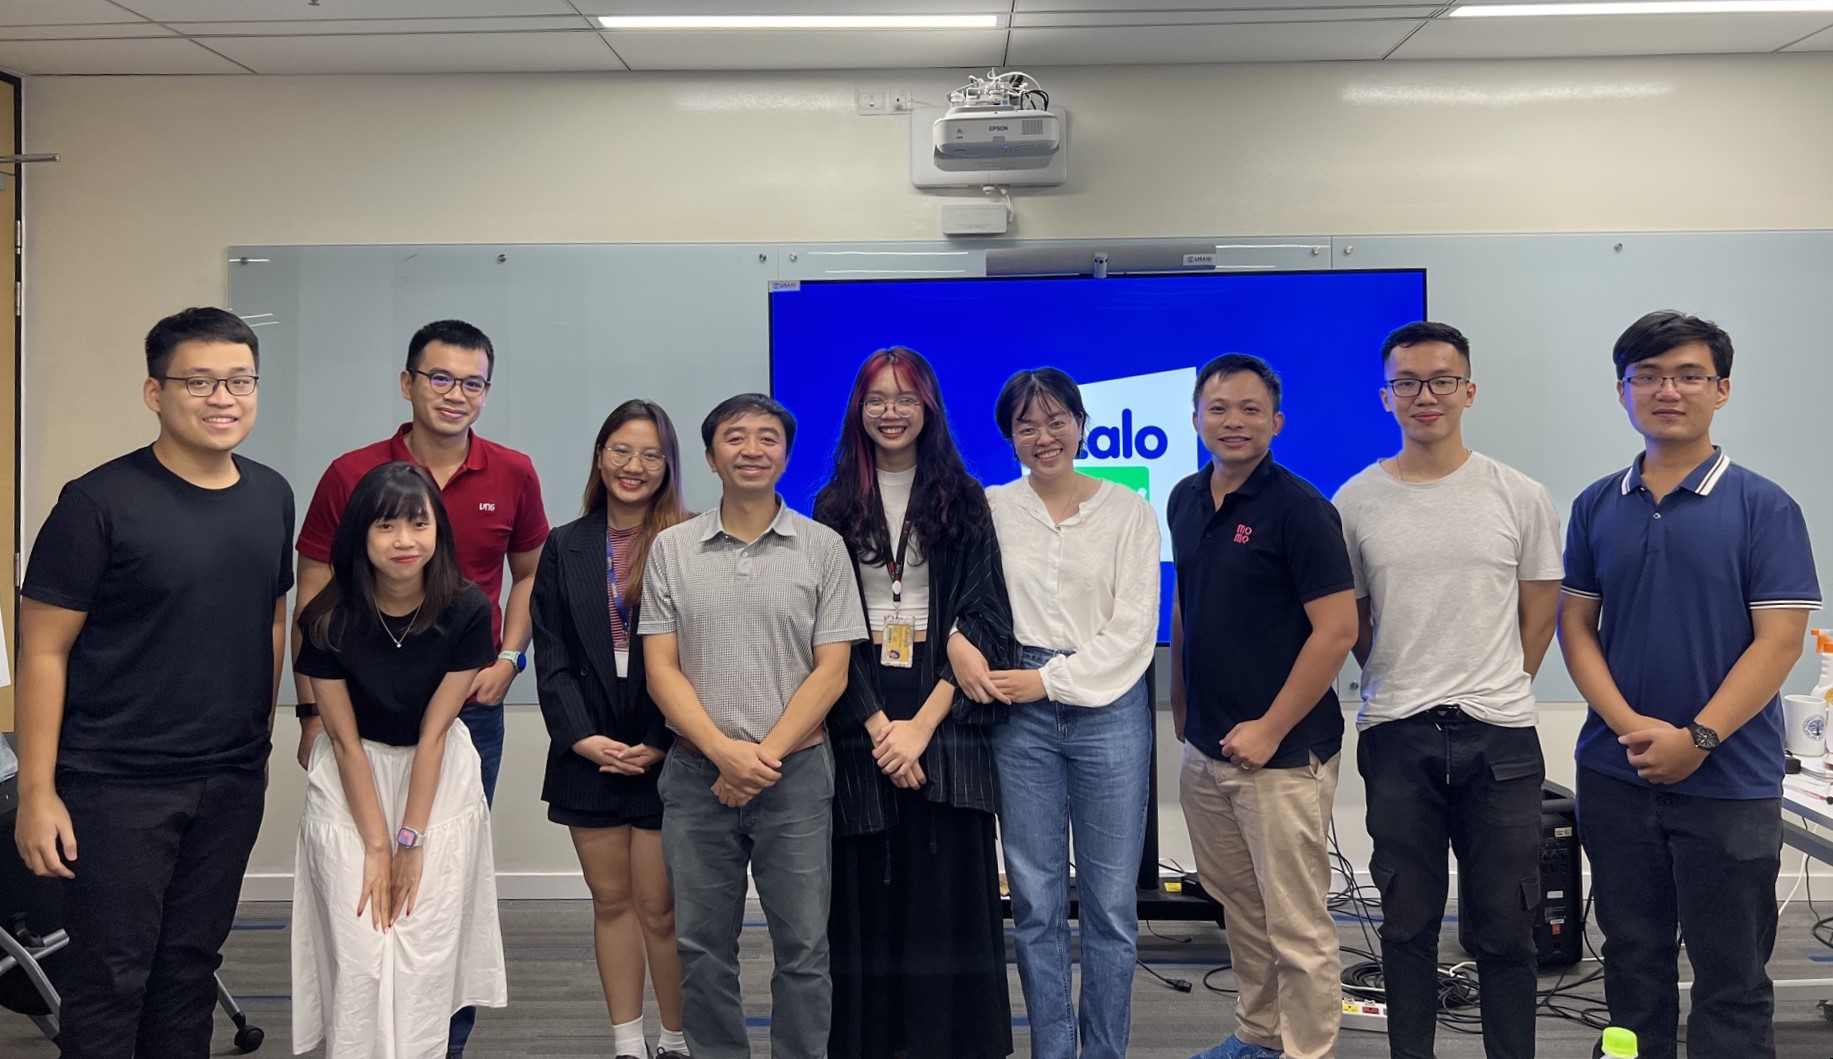 Alumnus Phan Cảnh Minh Phước collaborates with lecturer to establish “Product Development” course